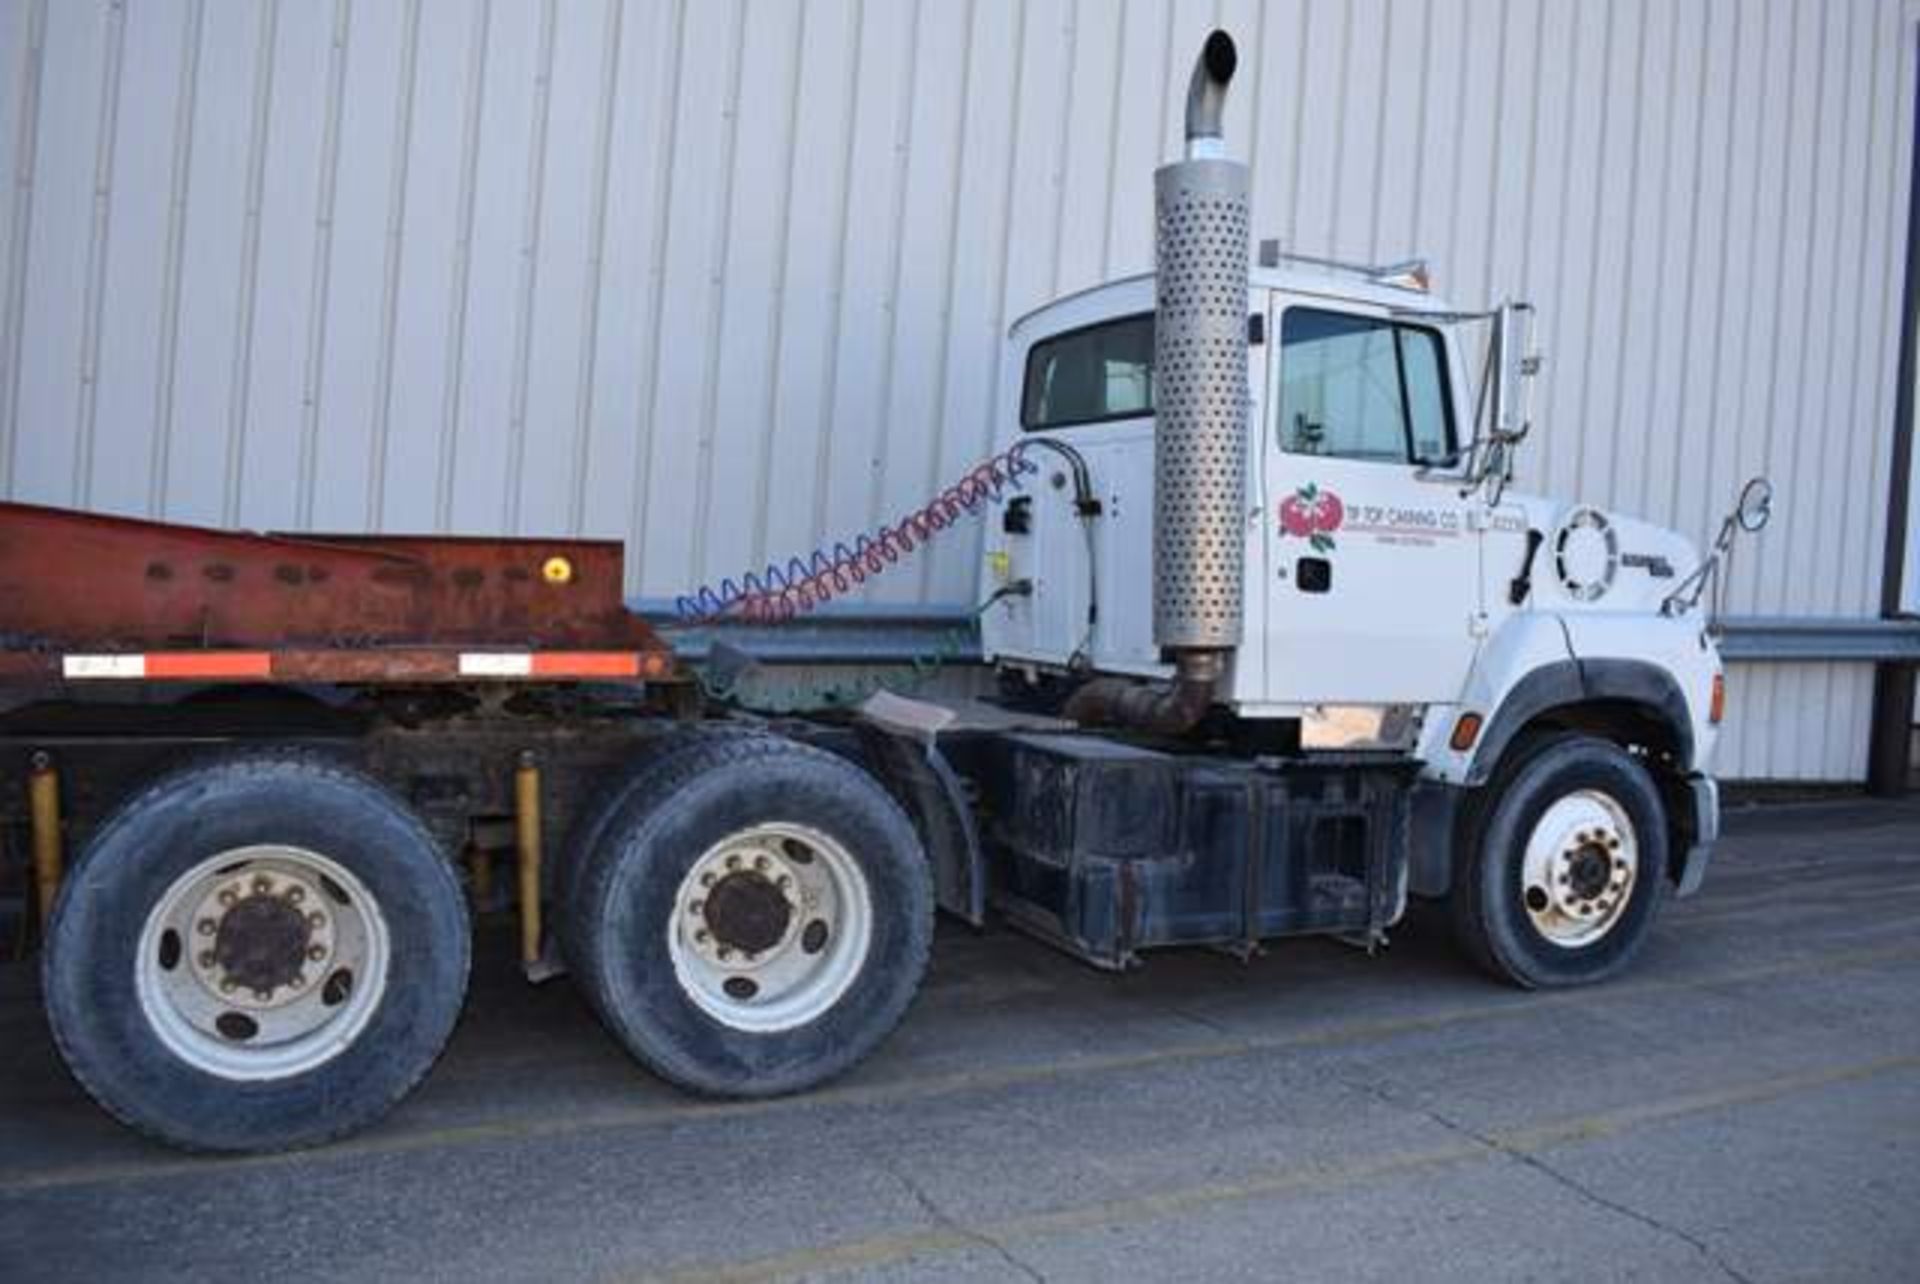 1996 Ford L-9000 Aeromax Day Cab Tractor, Tandem Axle, Air Ride, Cat engine, Air Slide 5th Wheel, - Image 2 of 2